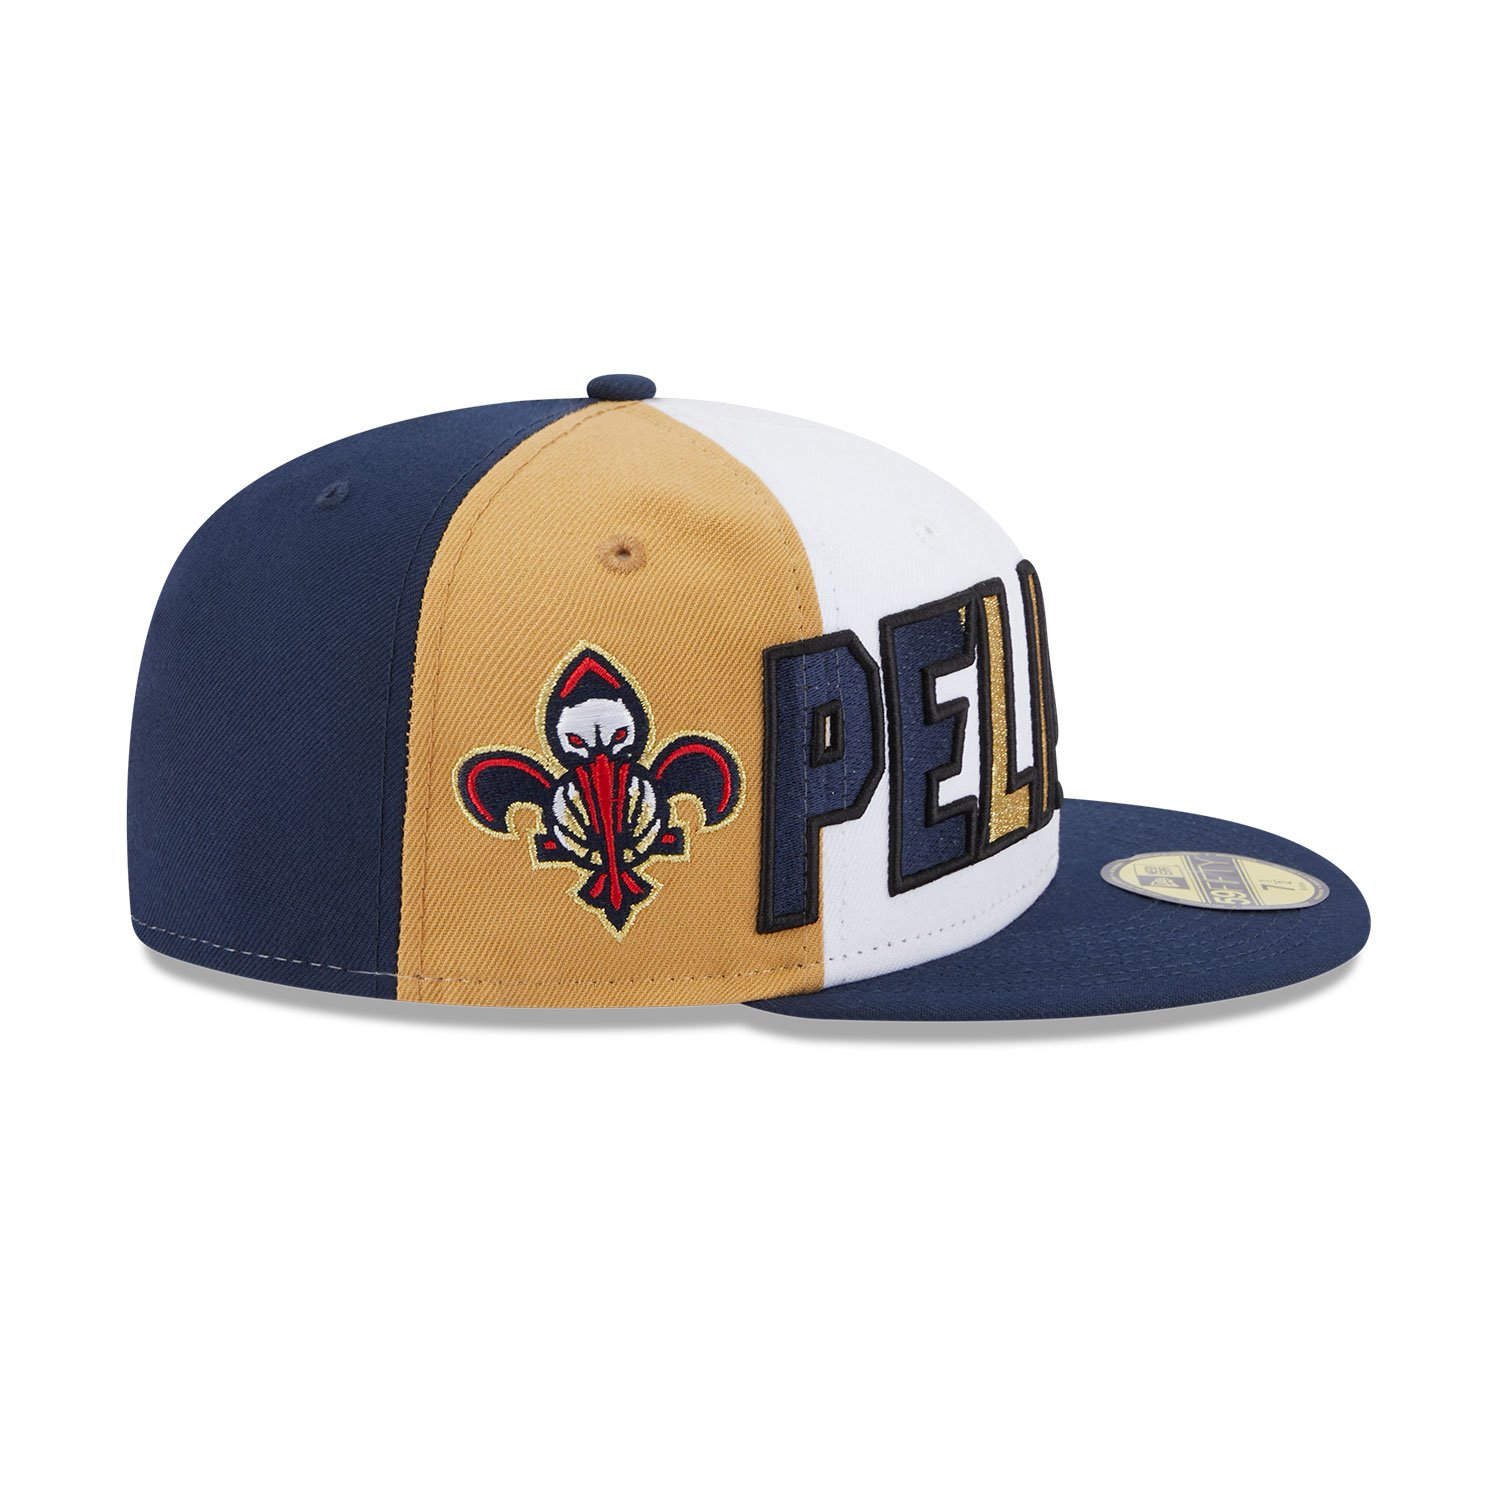 New Orleans Pelicans NBA Back Half Blue 59FIFTY Fitted Cap